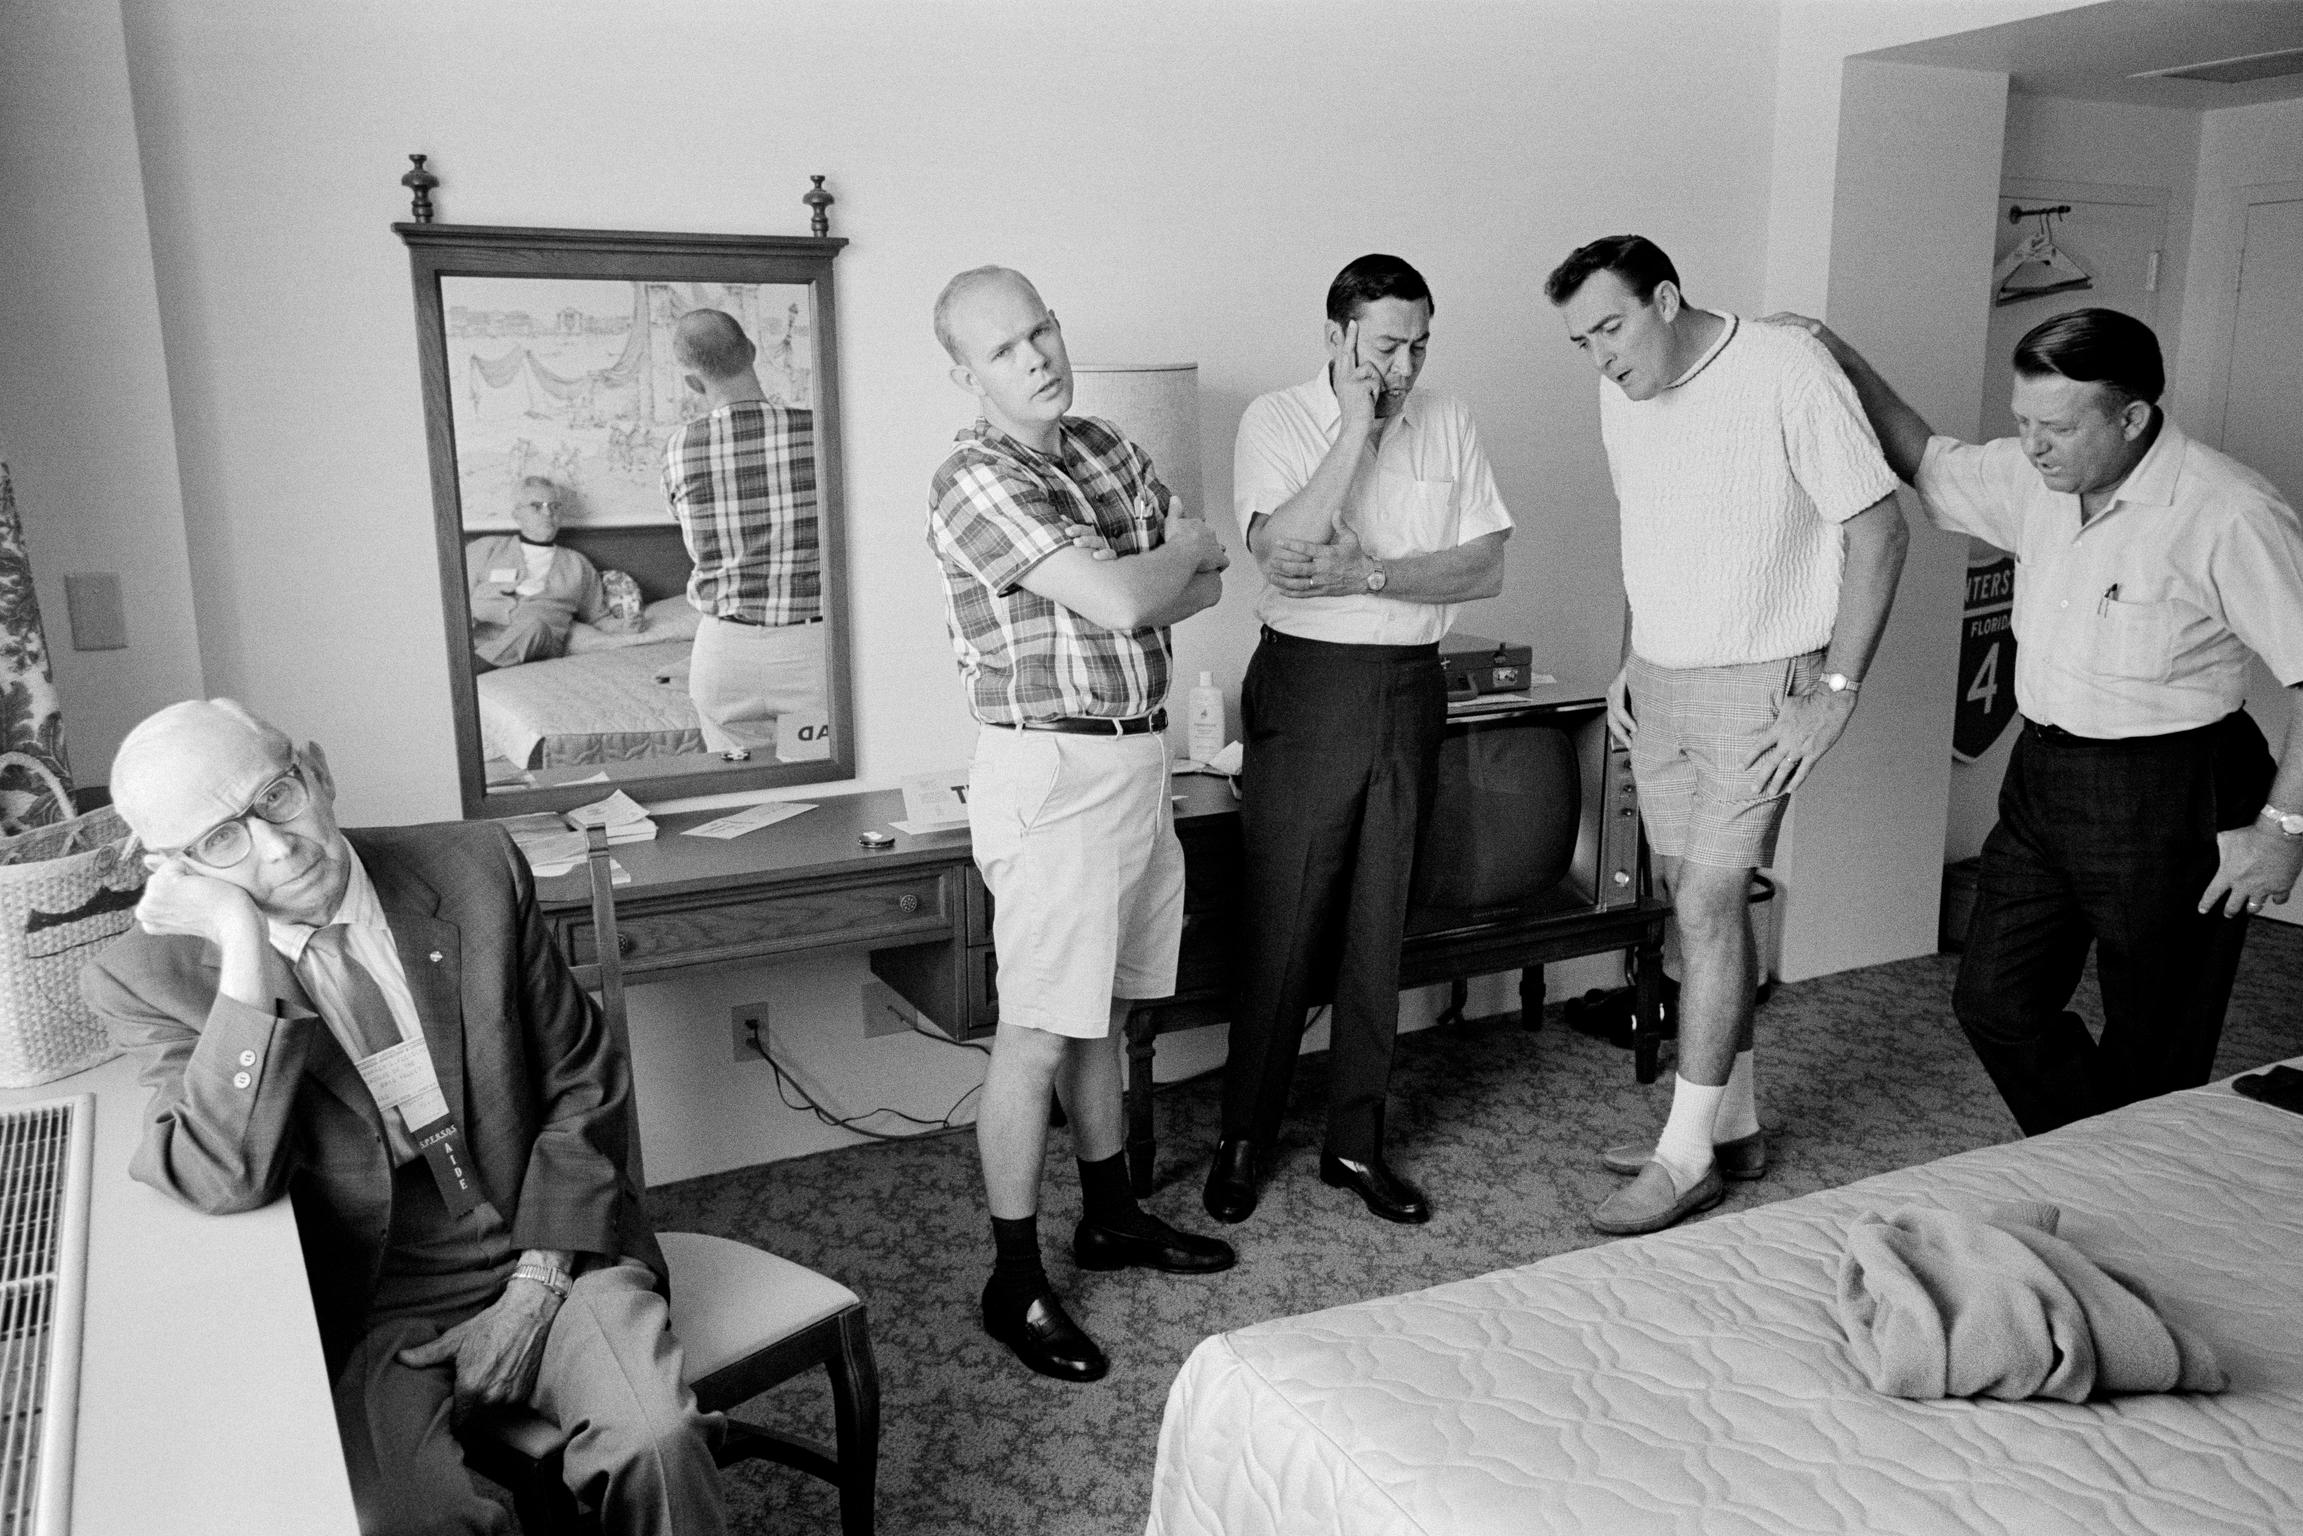 Barbershop quartet rehearsal in a hotel bedroom during a convention. Phoenix, Arizona